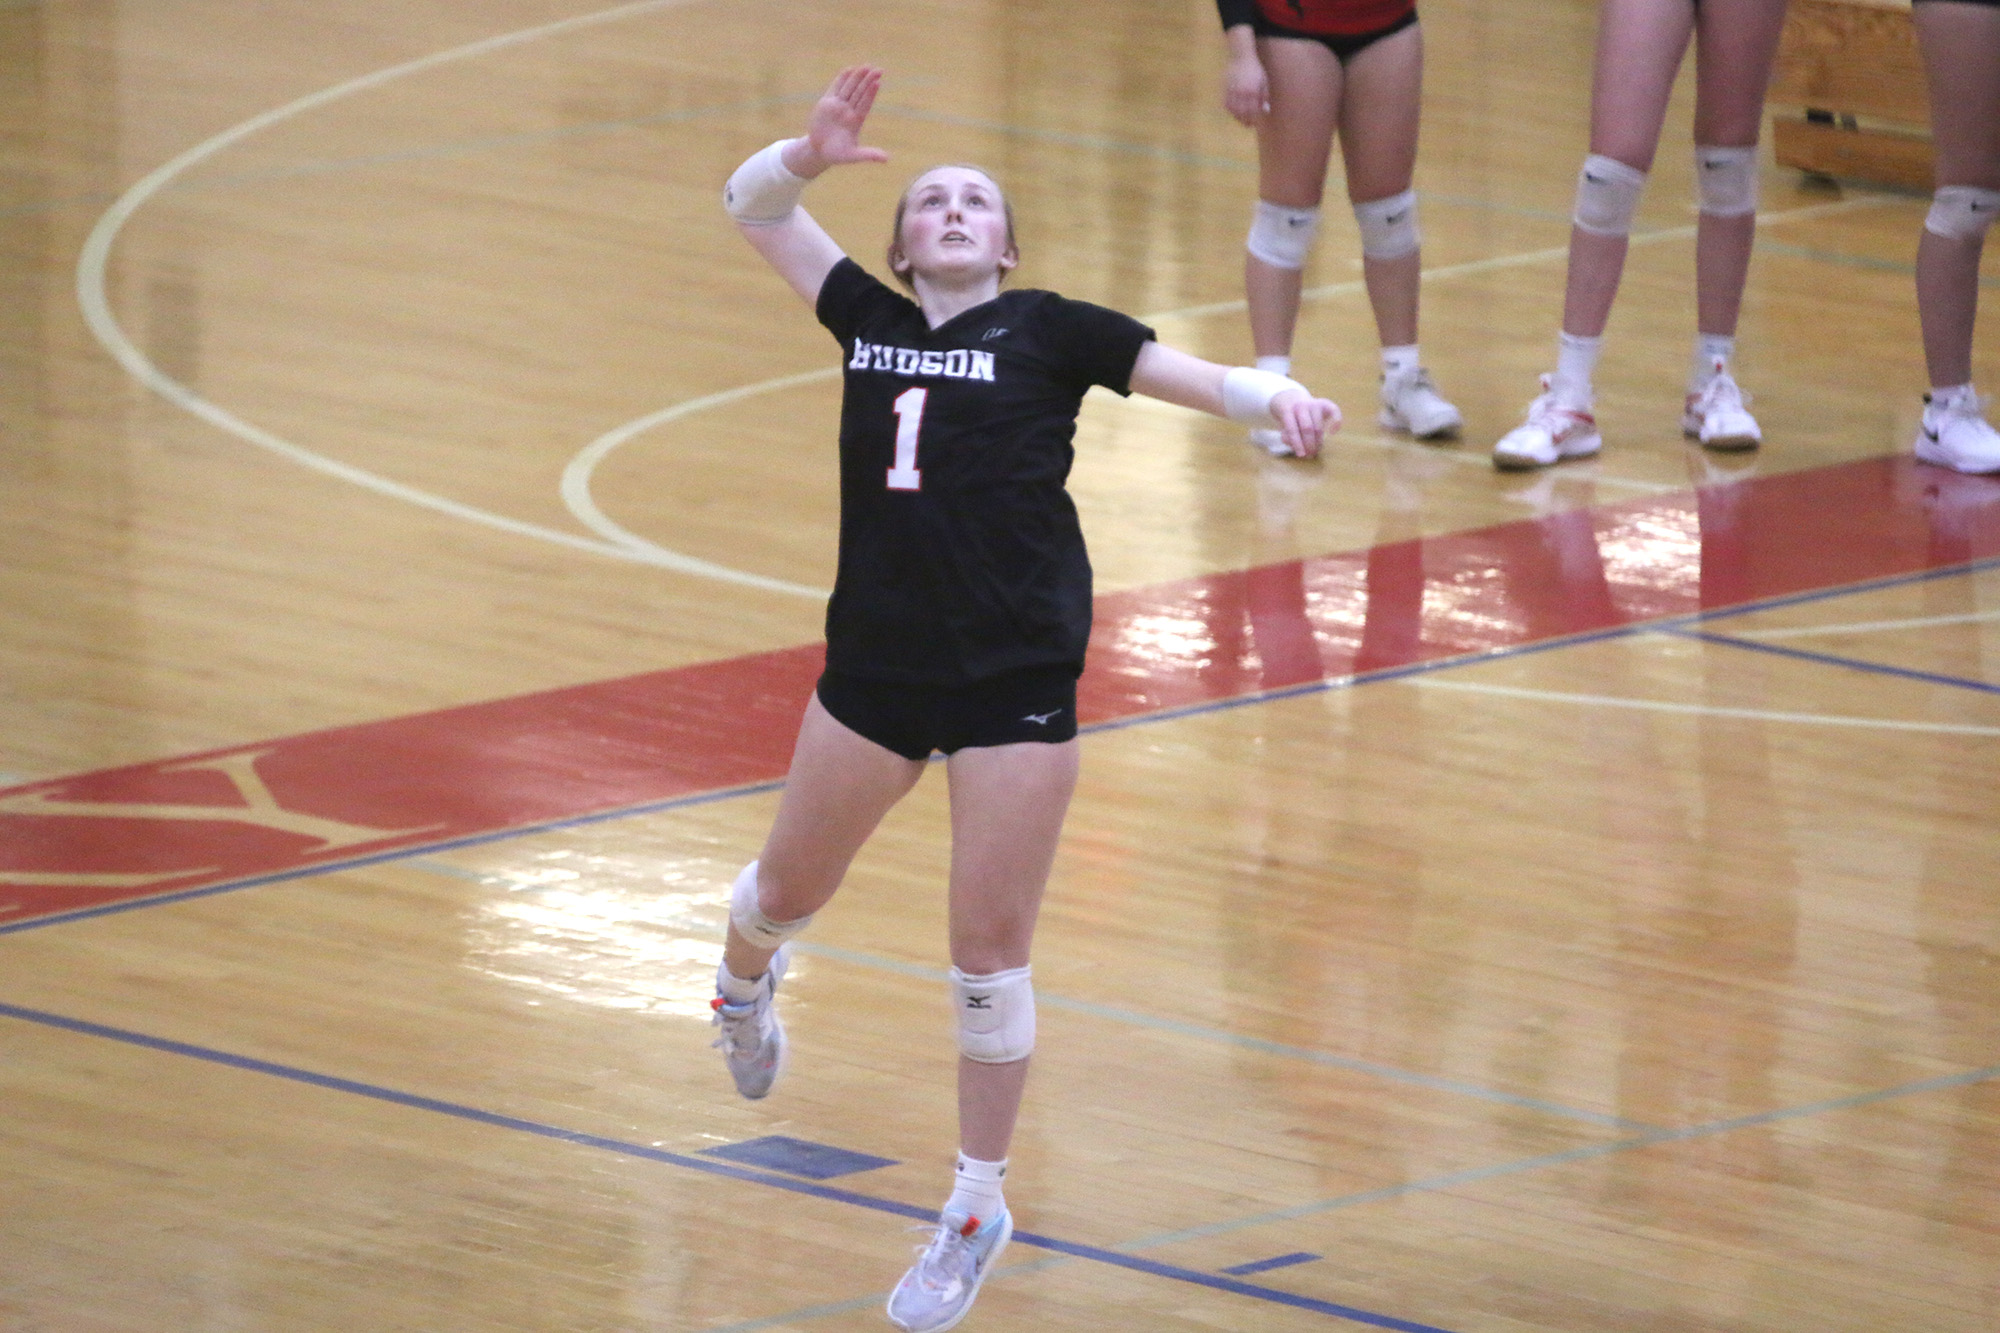 Hudson volleyball fights until the end against Ipswich